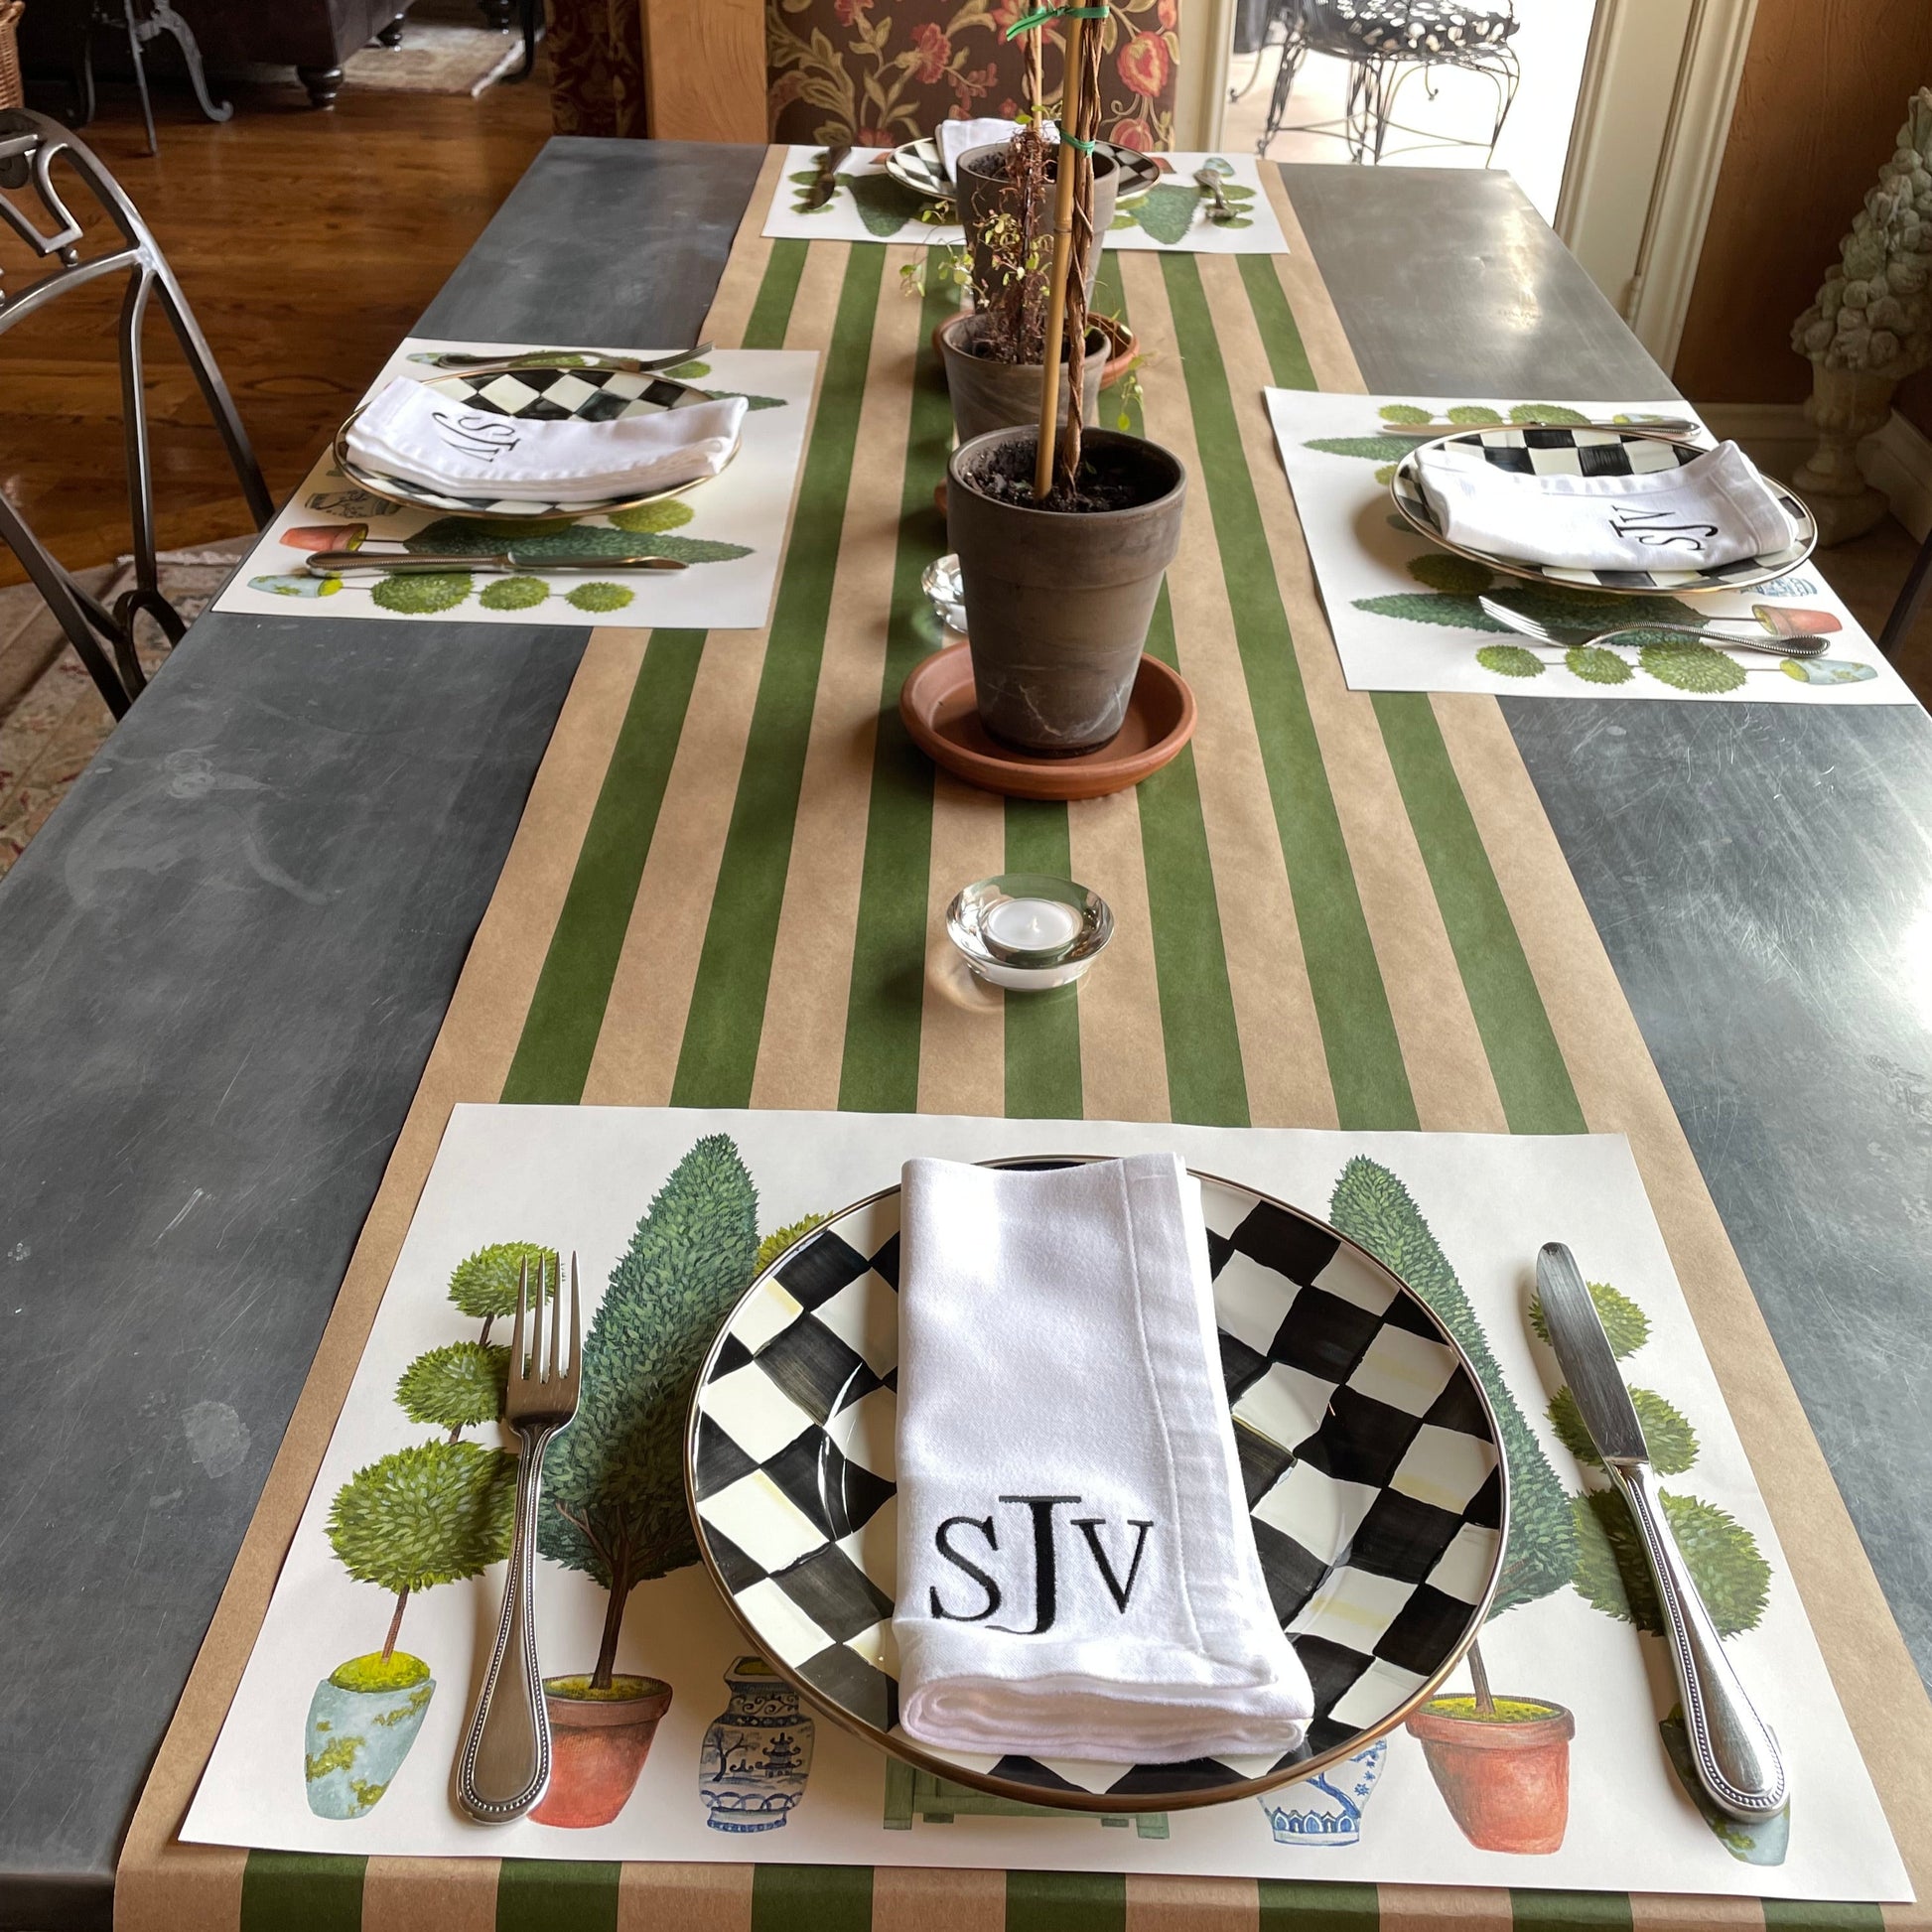 This how  I set a table using the Topiary Garden products.